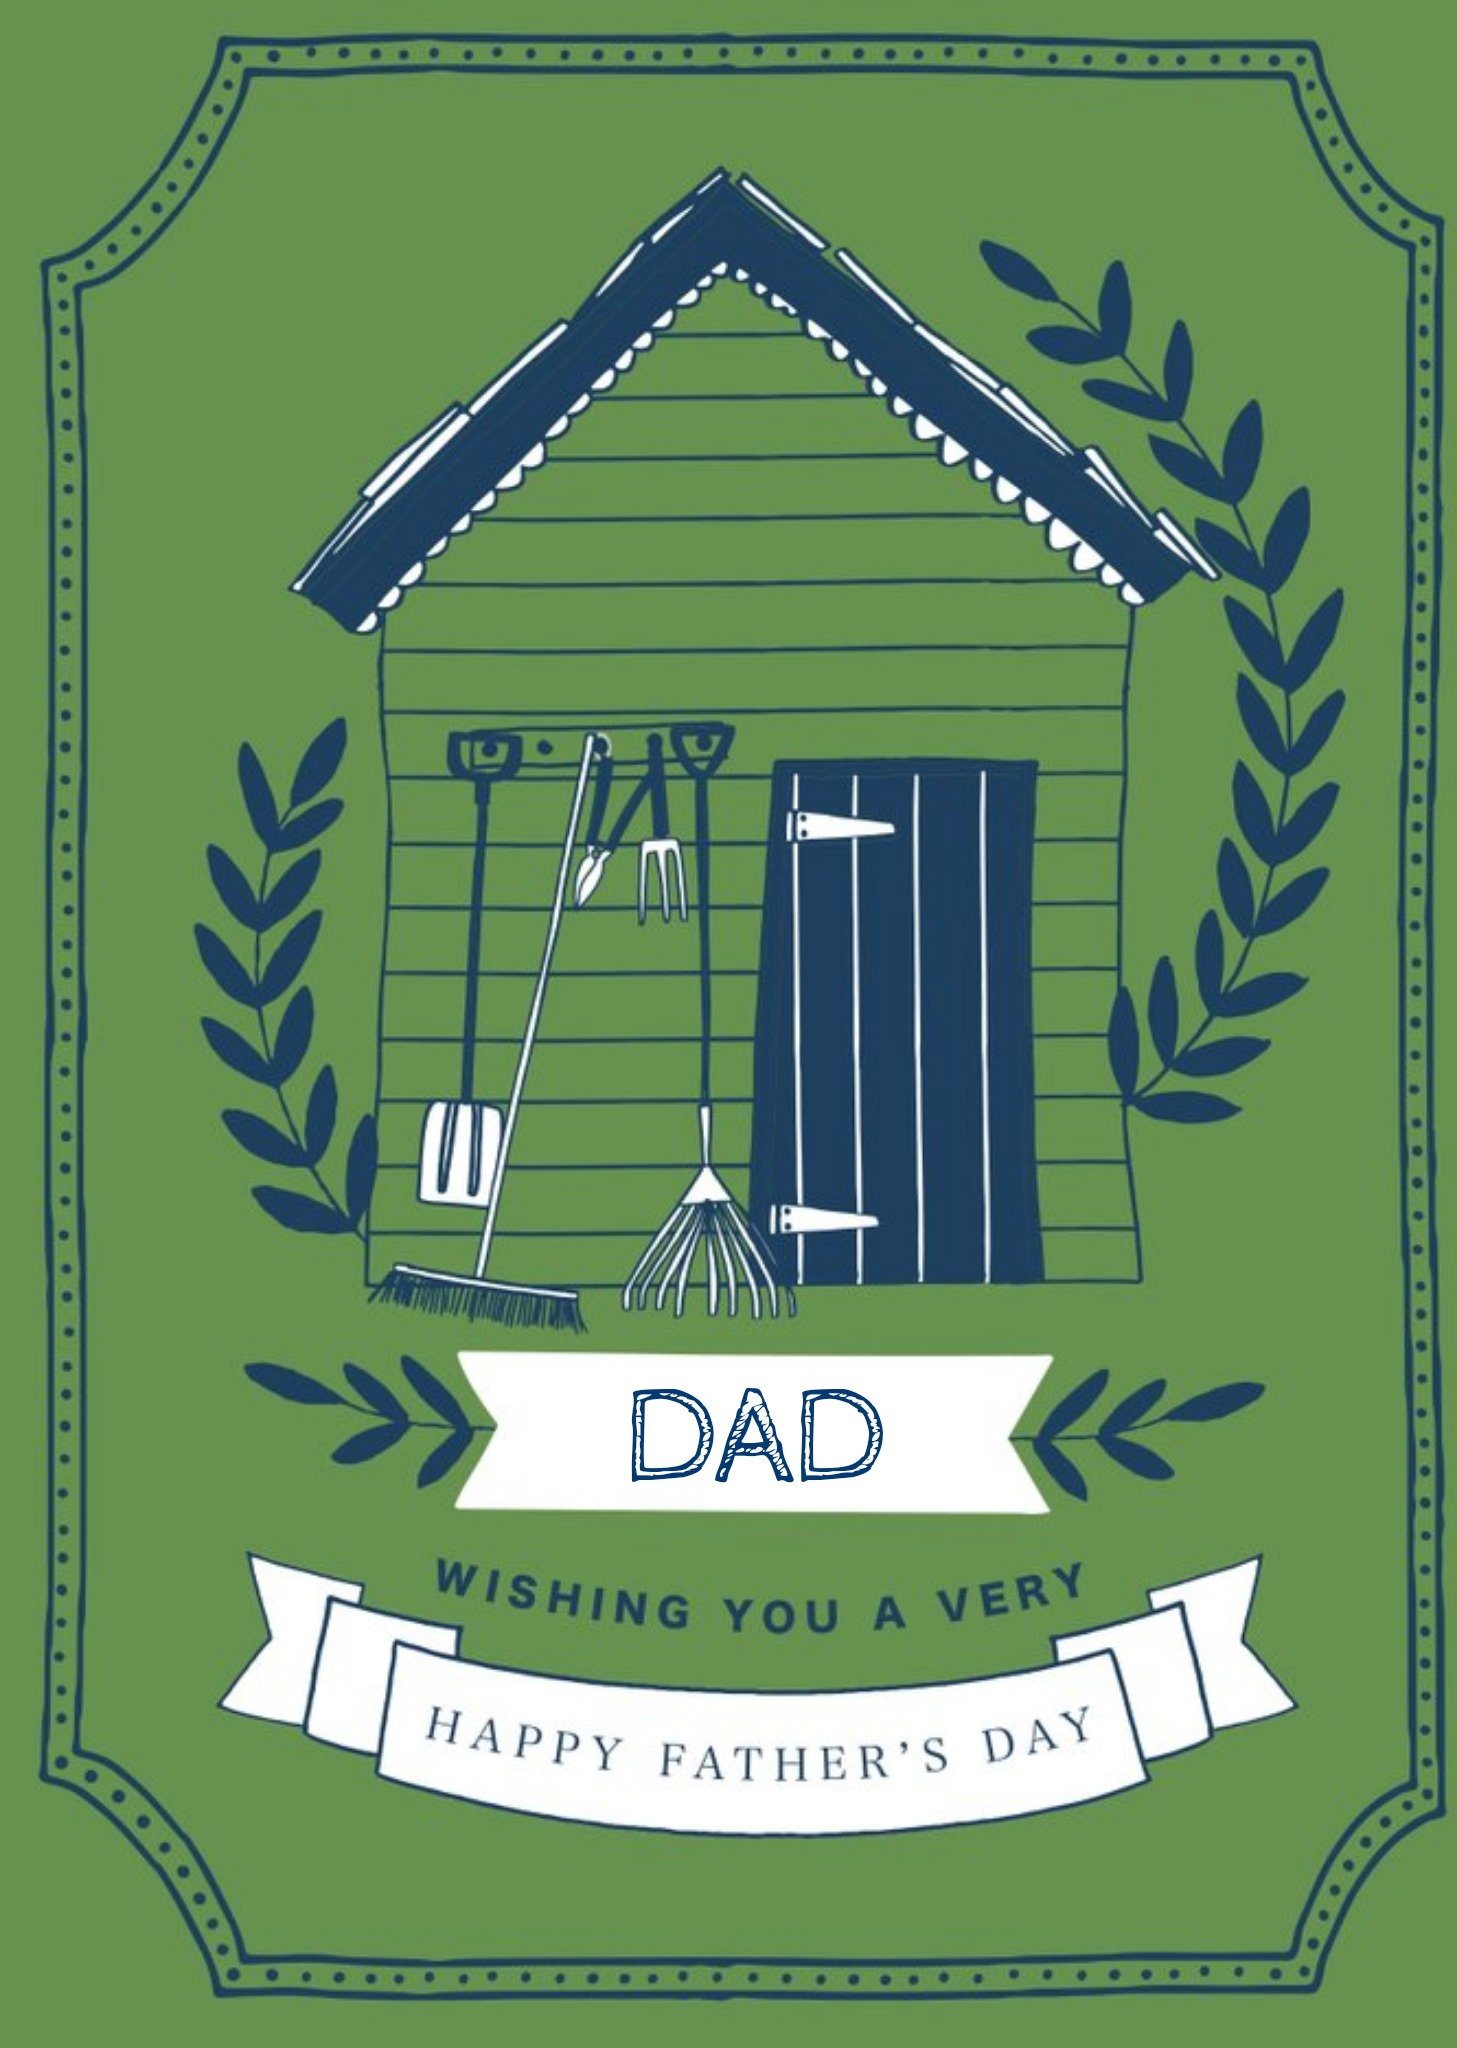 Moonpig Bright Green Garden Shed Illustration Father's Day Card Ecard